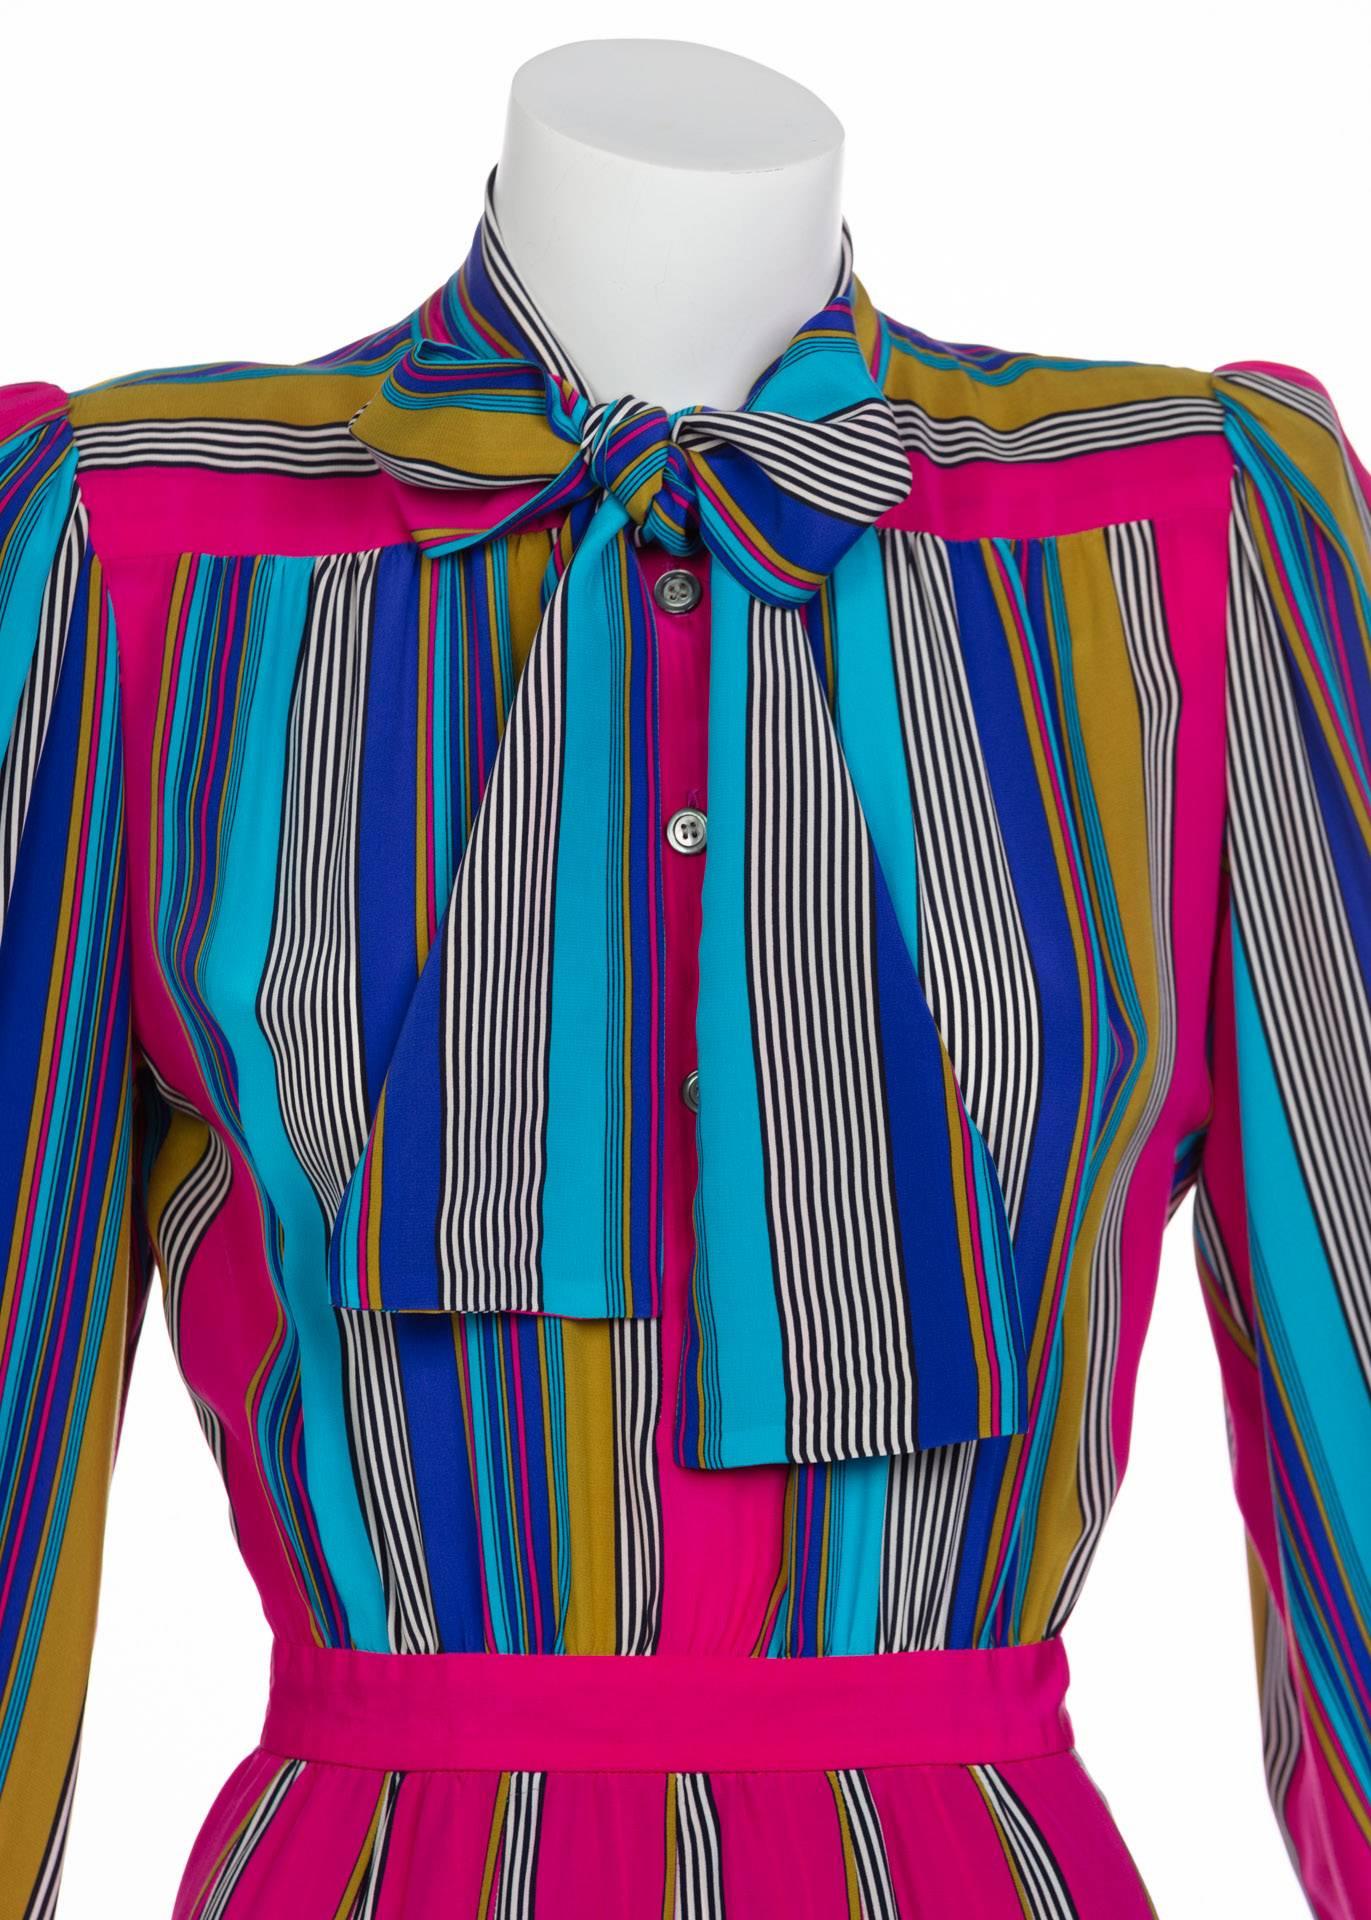 1982 Yves Saint Laurent Multicolored Striped Silk Dress Documented YSL For Sale 1